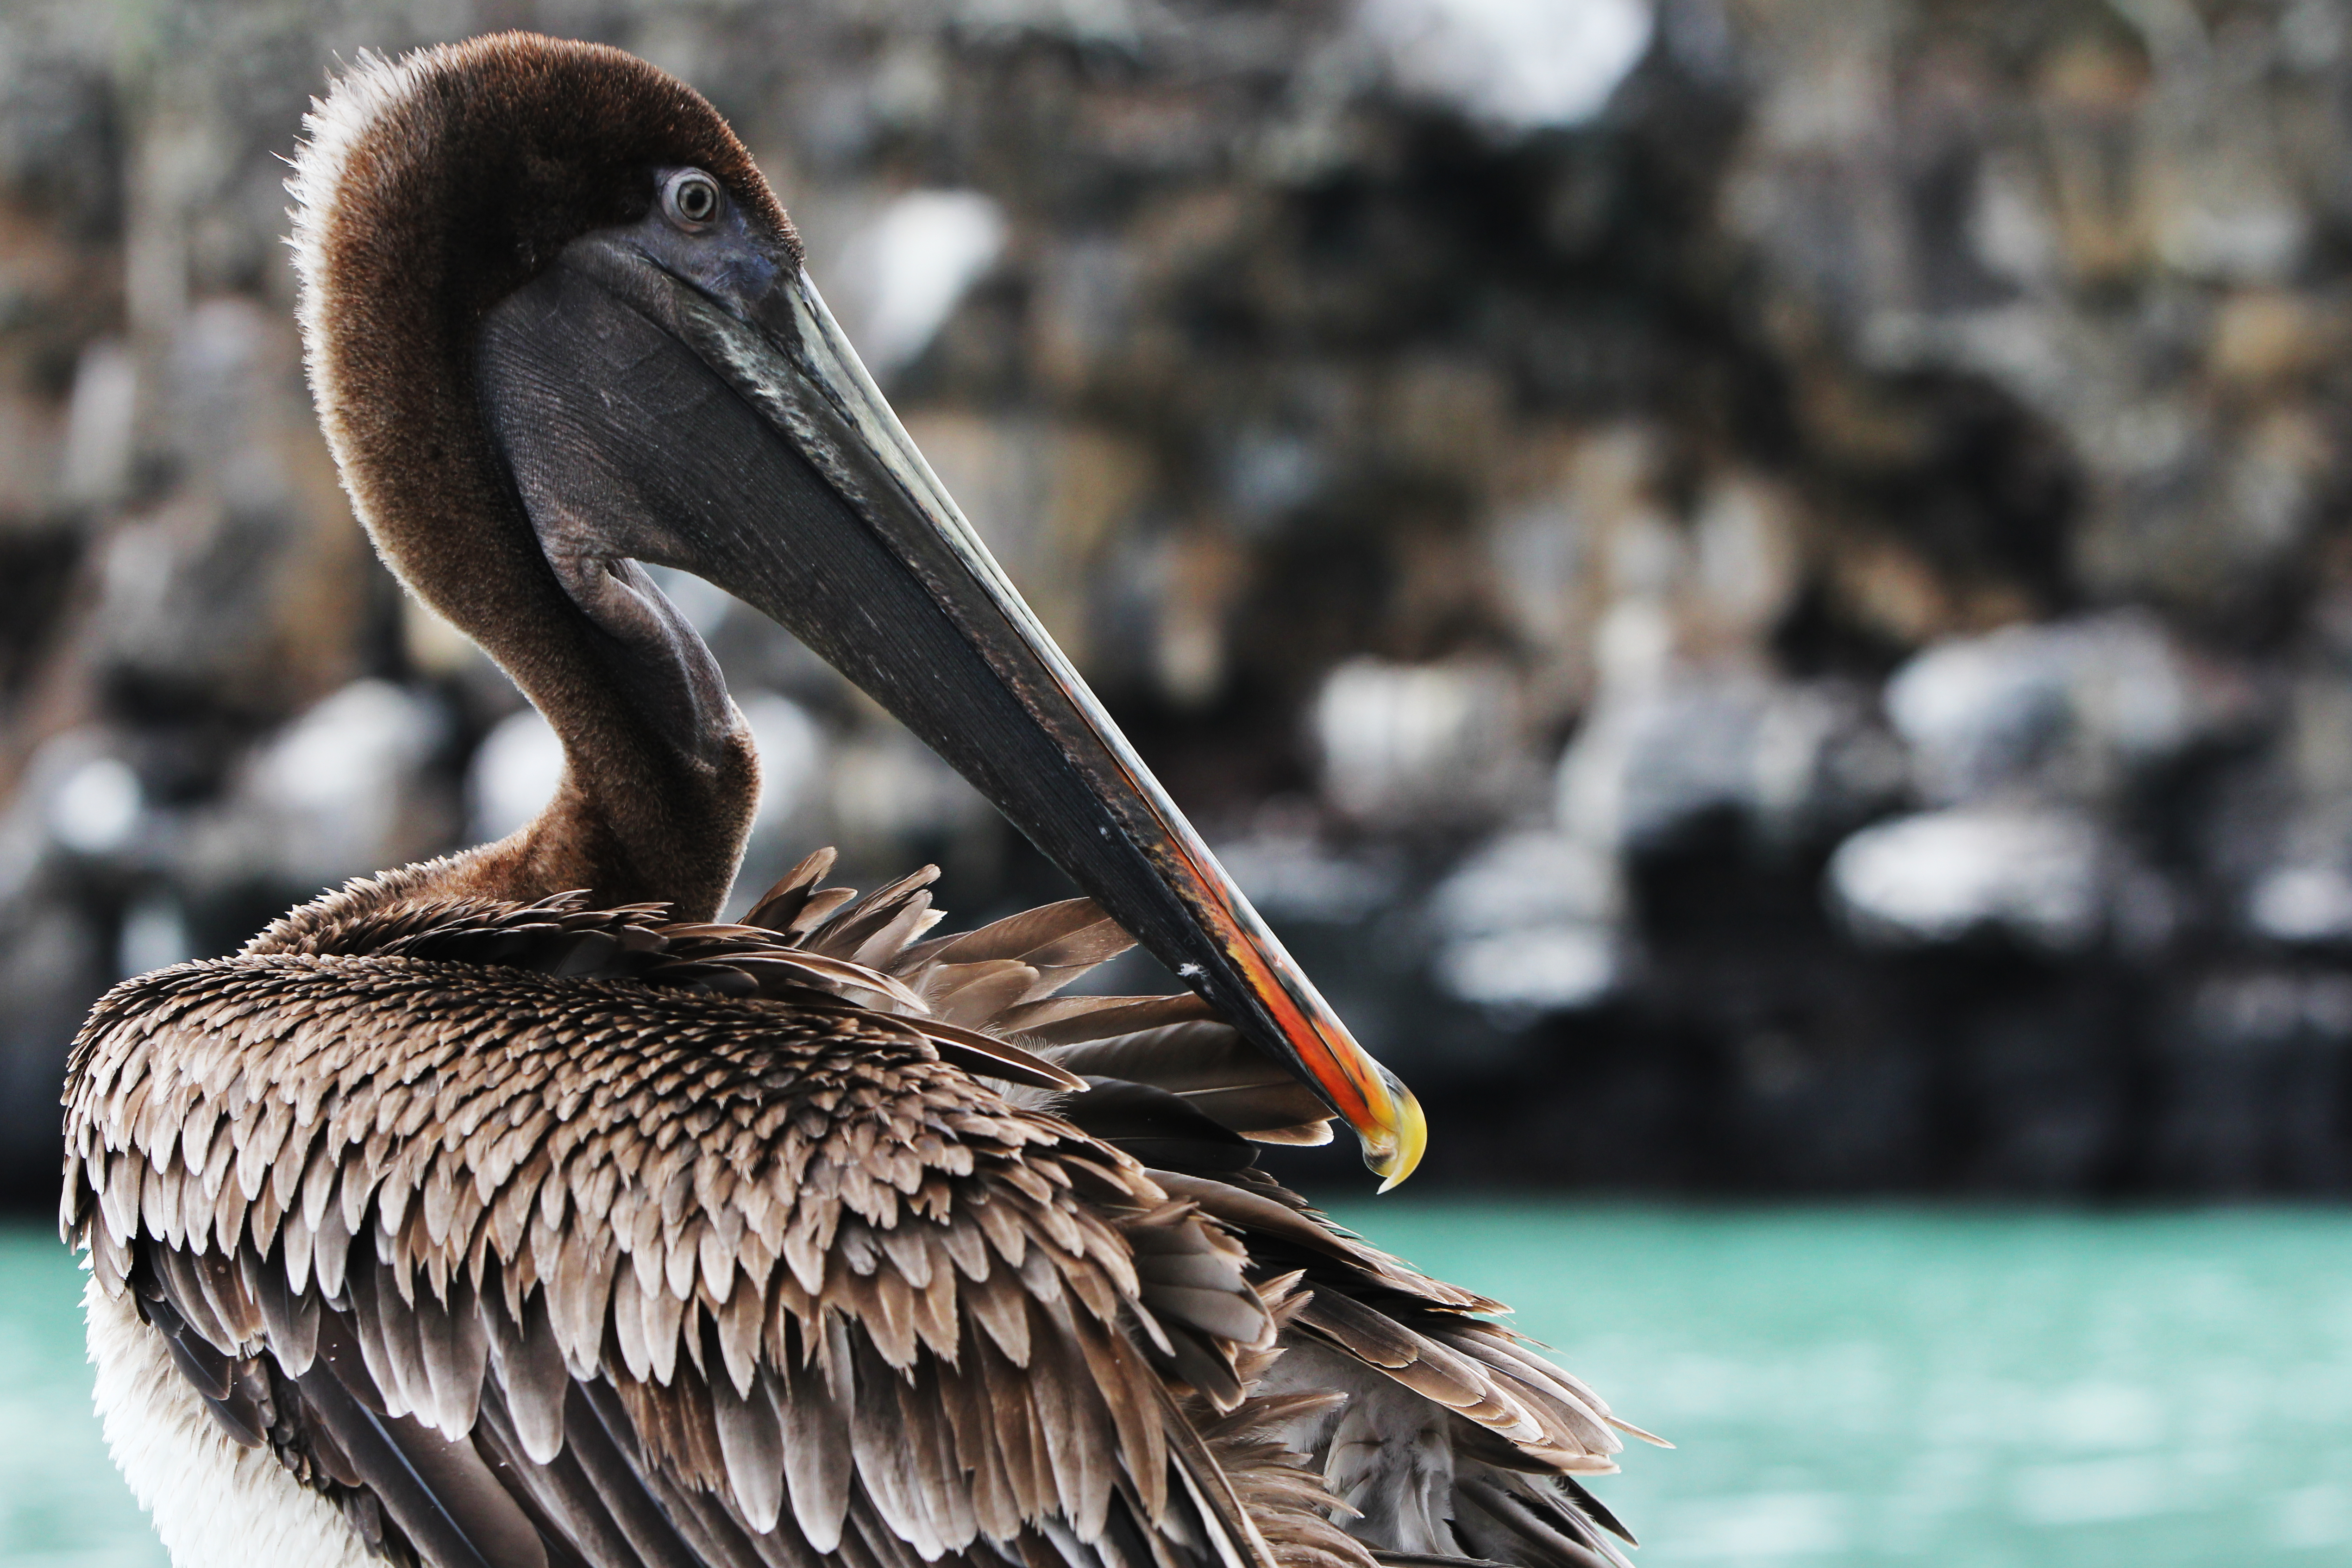 A pelican rests, overlooking the Malecon near Academy Bay